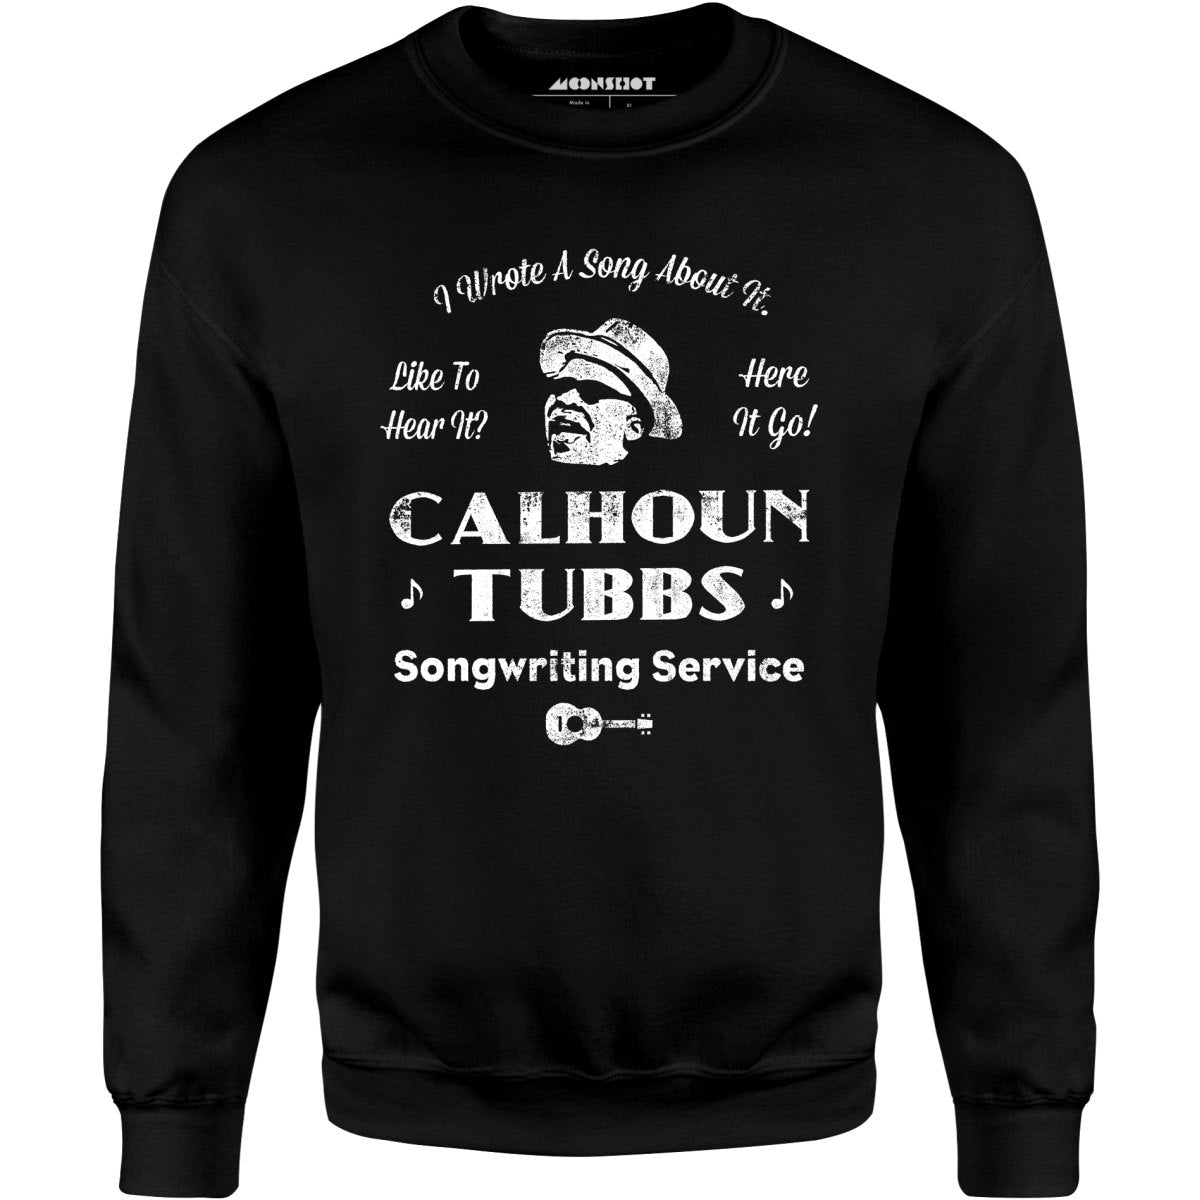 Calhoun Tubbs - I Wrote a Song About It - Unisex Sweatshirt